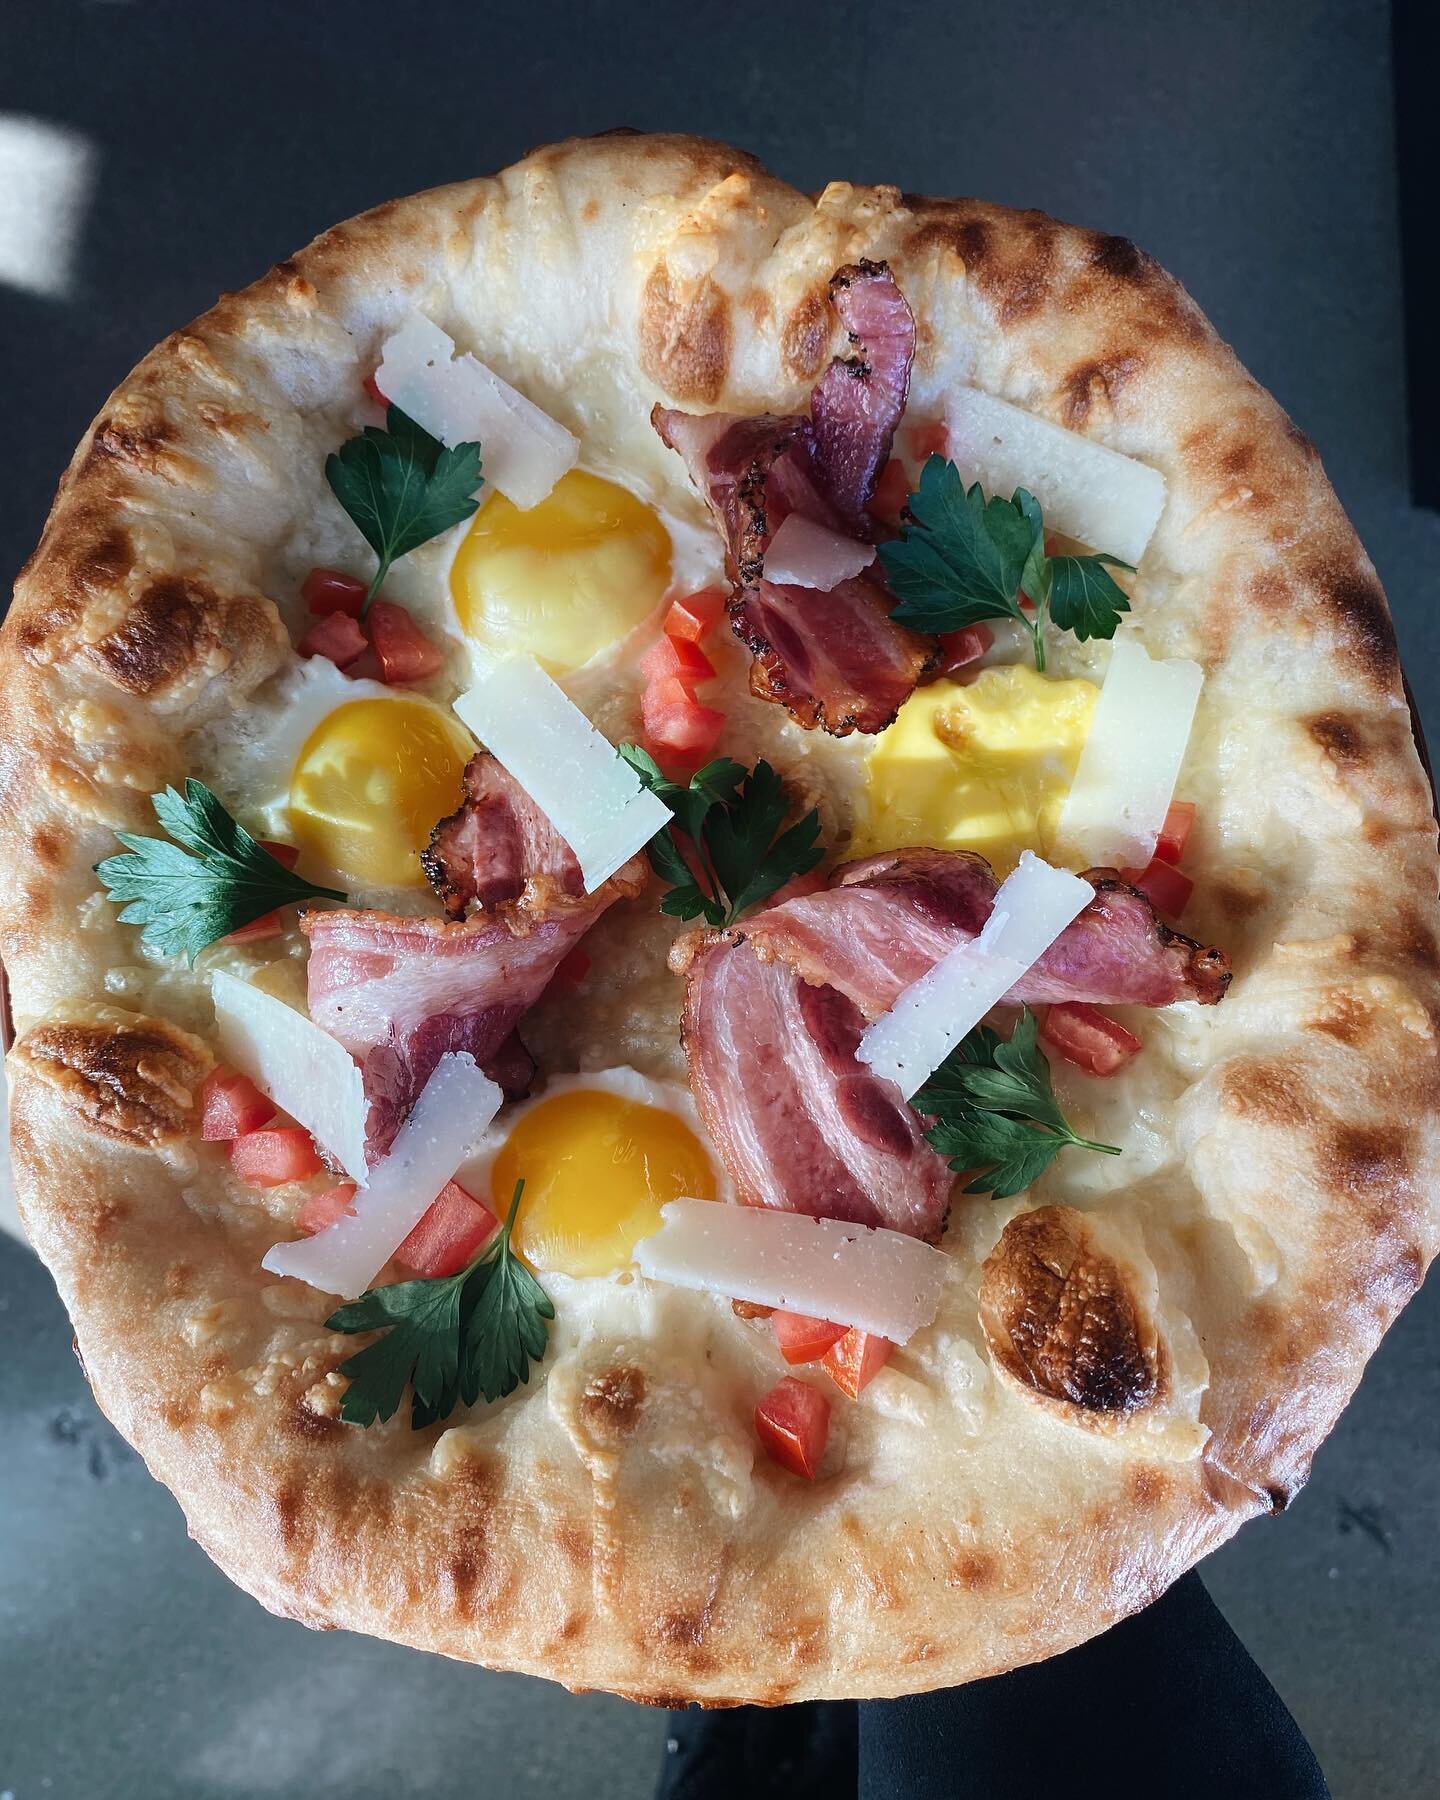 YYC PIZZA WEEK IS AWESOME! We are so happy to be part of this project. Come try our Carbonara Pizza, made with a lot of love and first quality ingredients: thick pancetta, Italian pecorino, mozzarella, eggs and the most delicious pizza 00&rdquo; doug